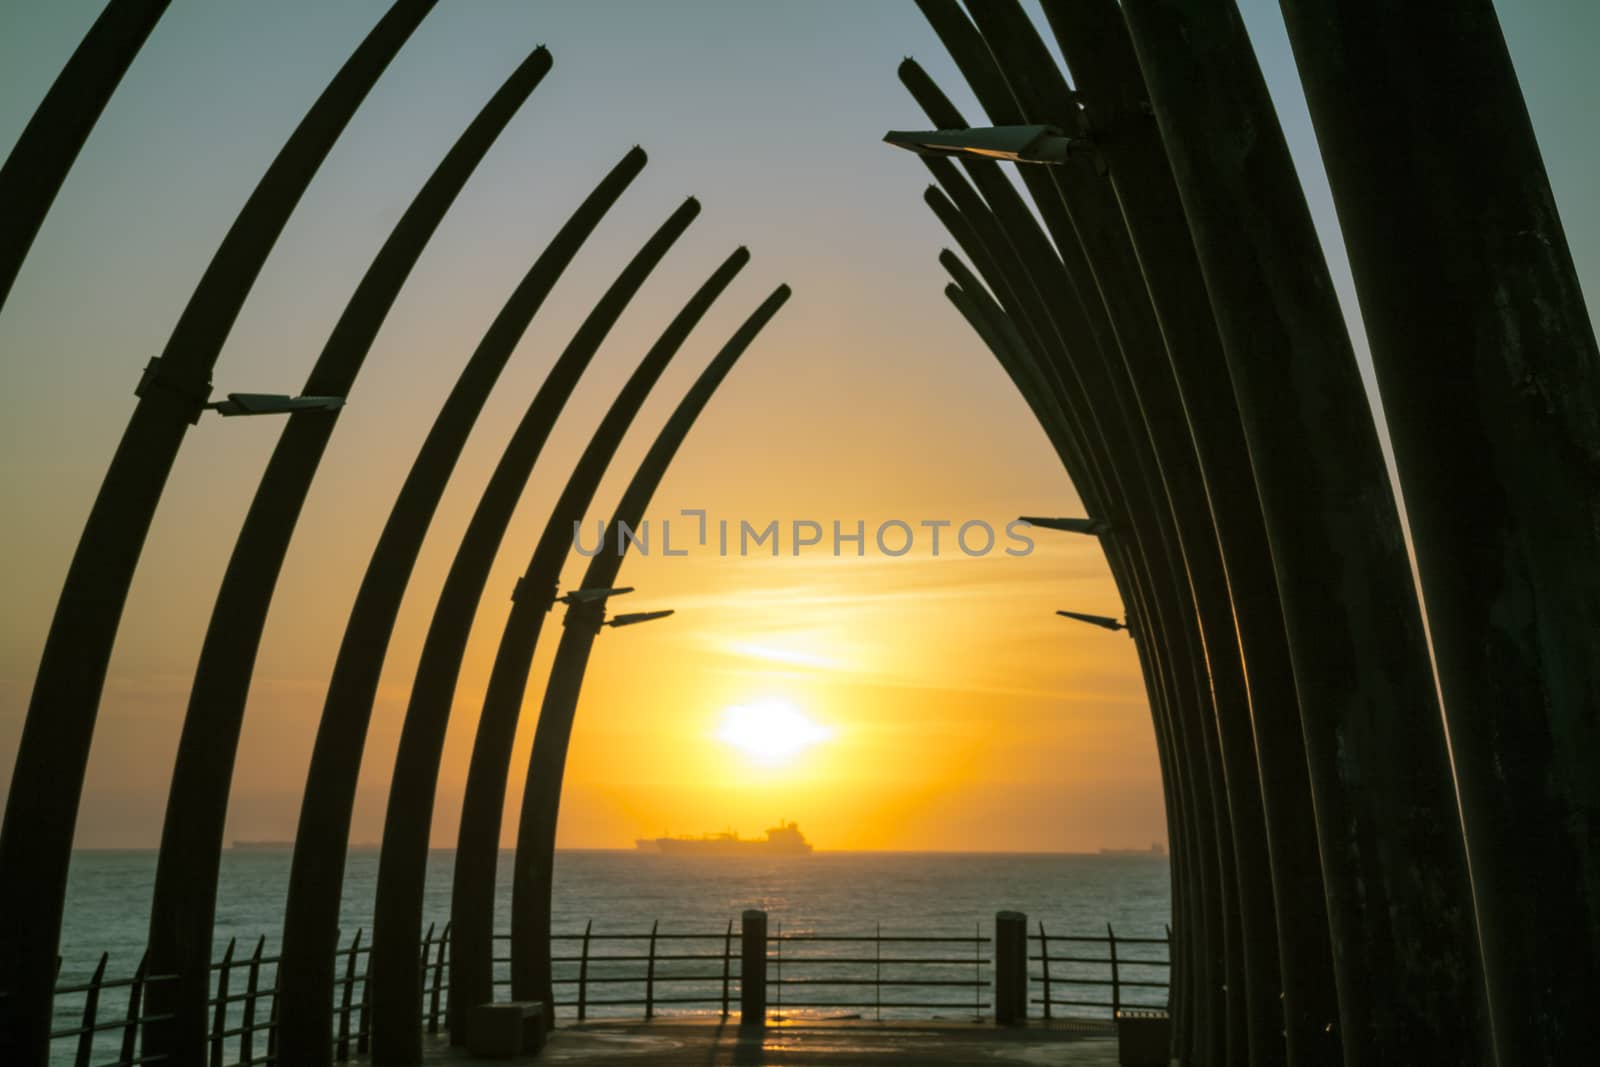 Umhlanga Pier in Durban South Africa in the morning Sunrise over the Indian Ocean with ships on the horizon